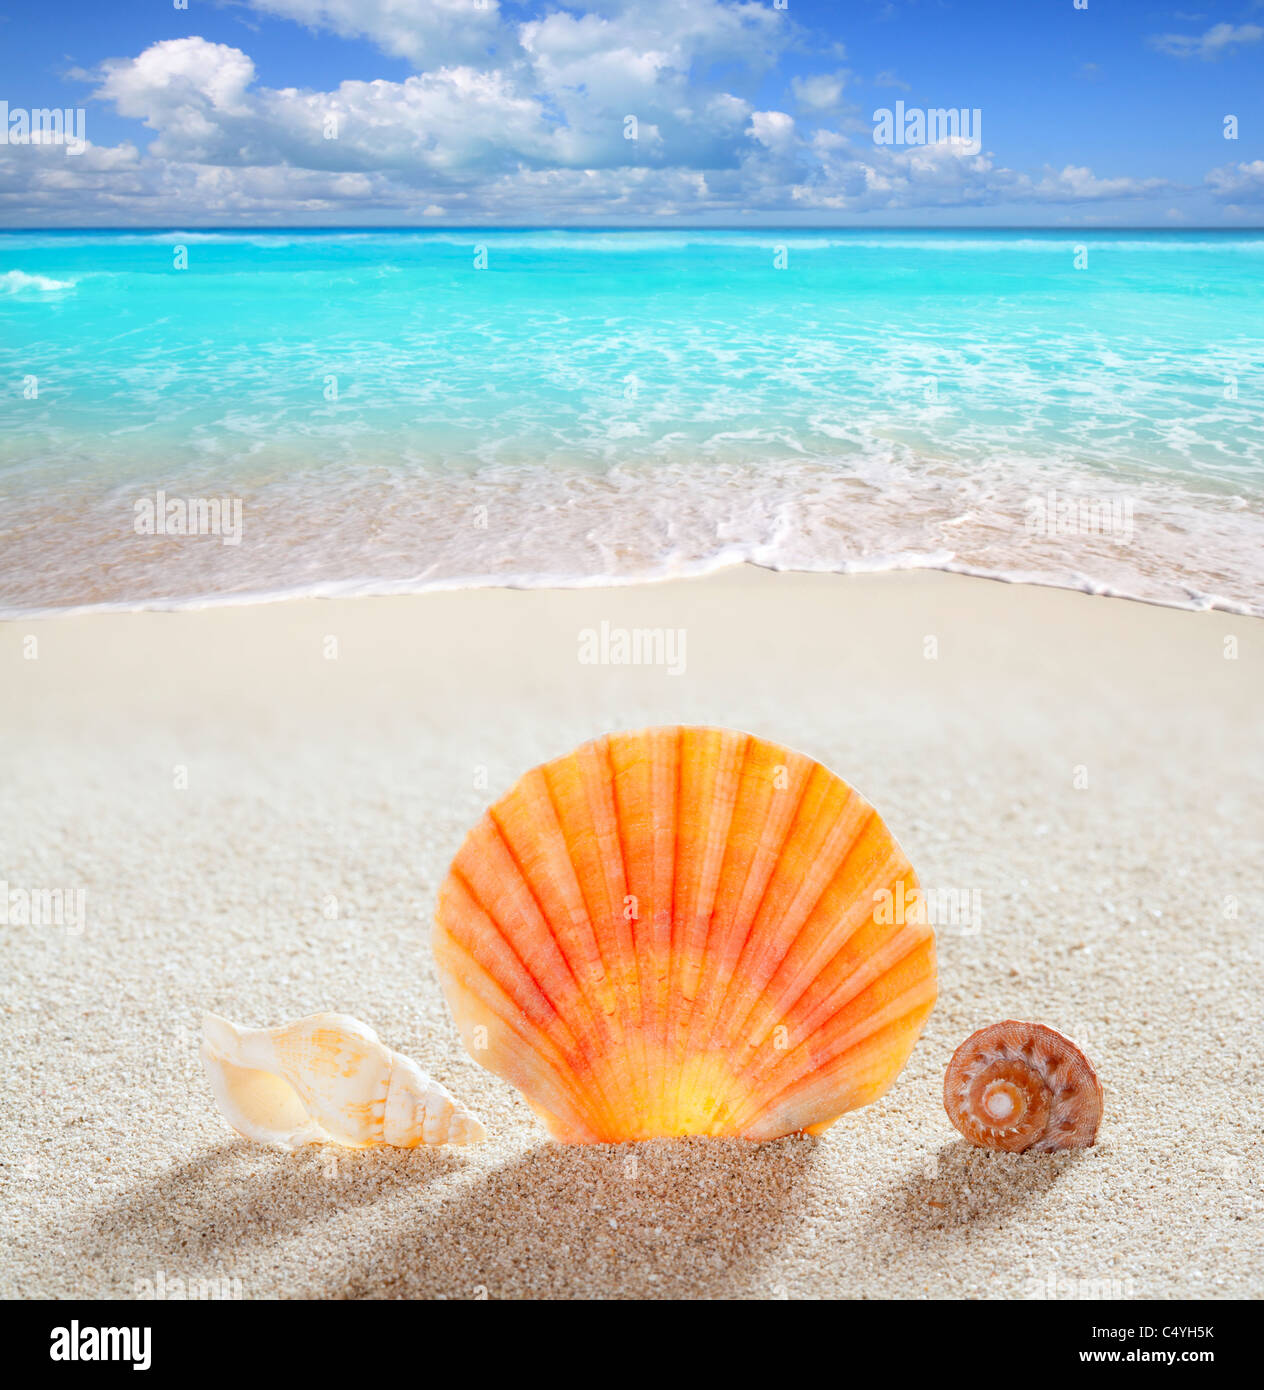 beach shell in white sand like a summer vacation background on turquoise Caribbean sea Stock Photo